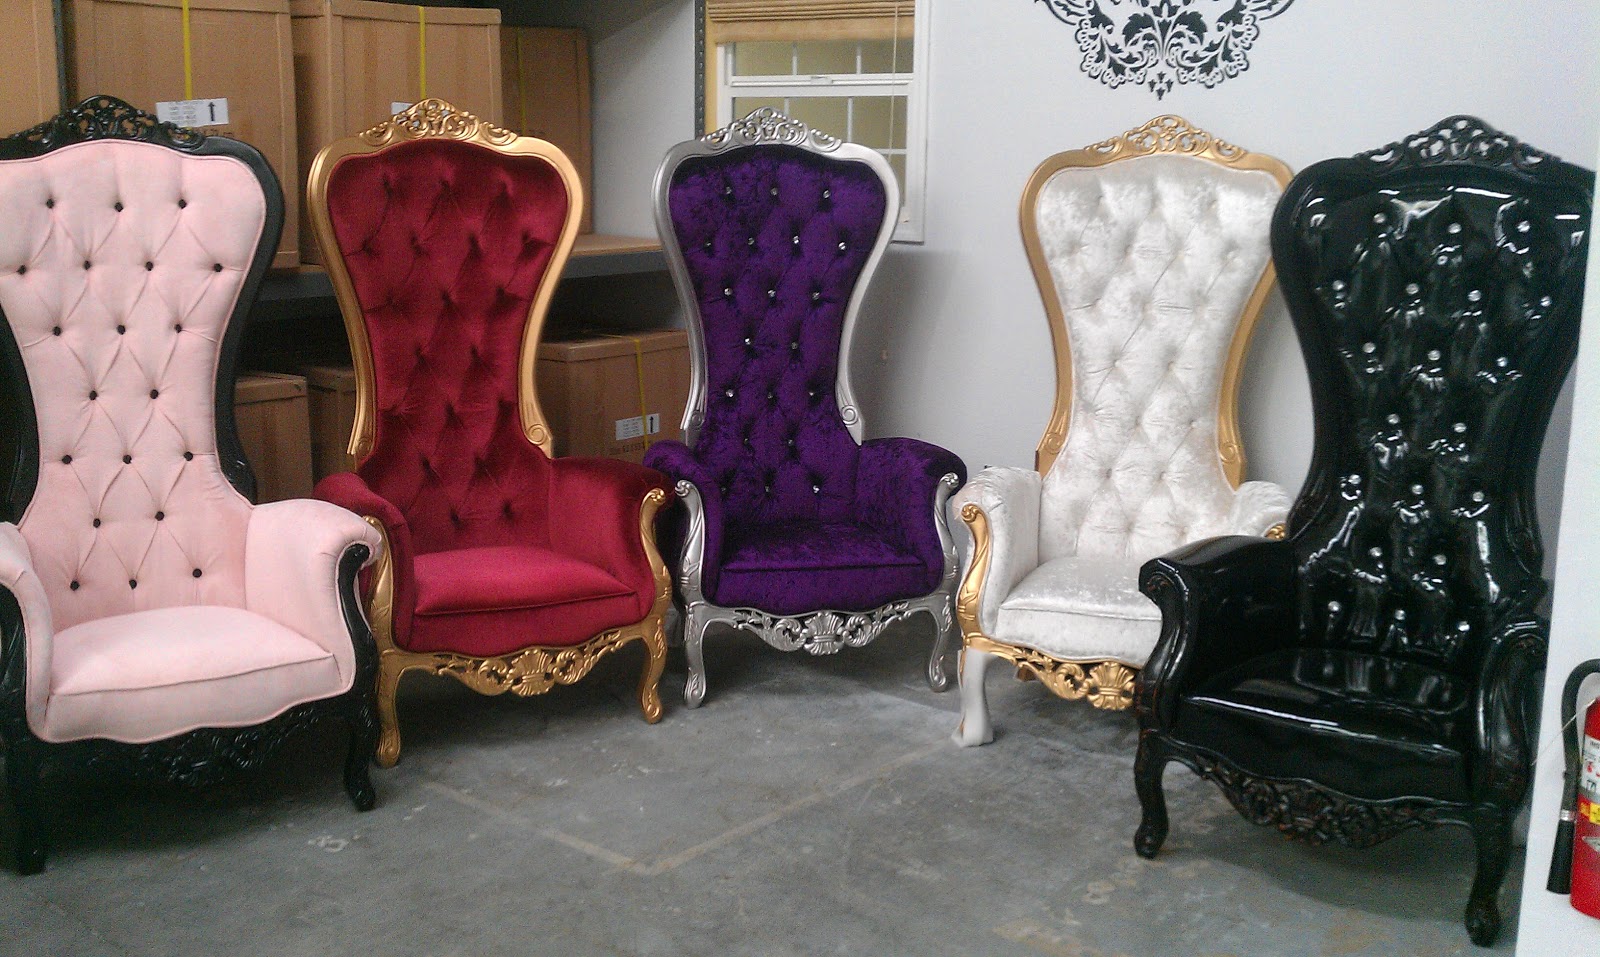 rent rent rent King Throne Chair Rental | 1600 x 957